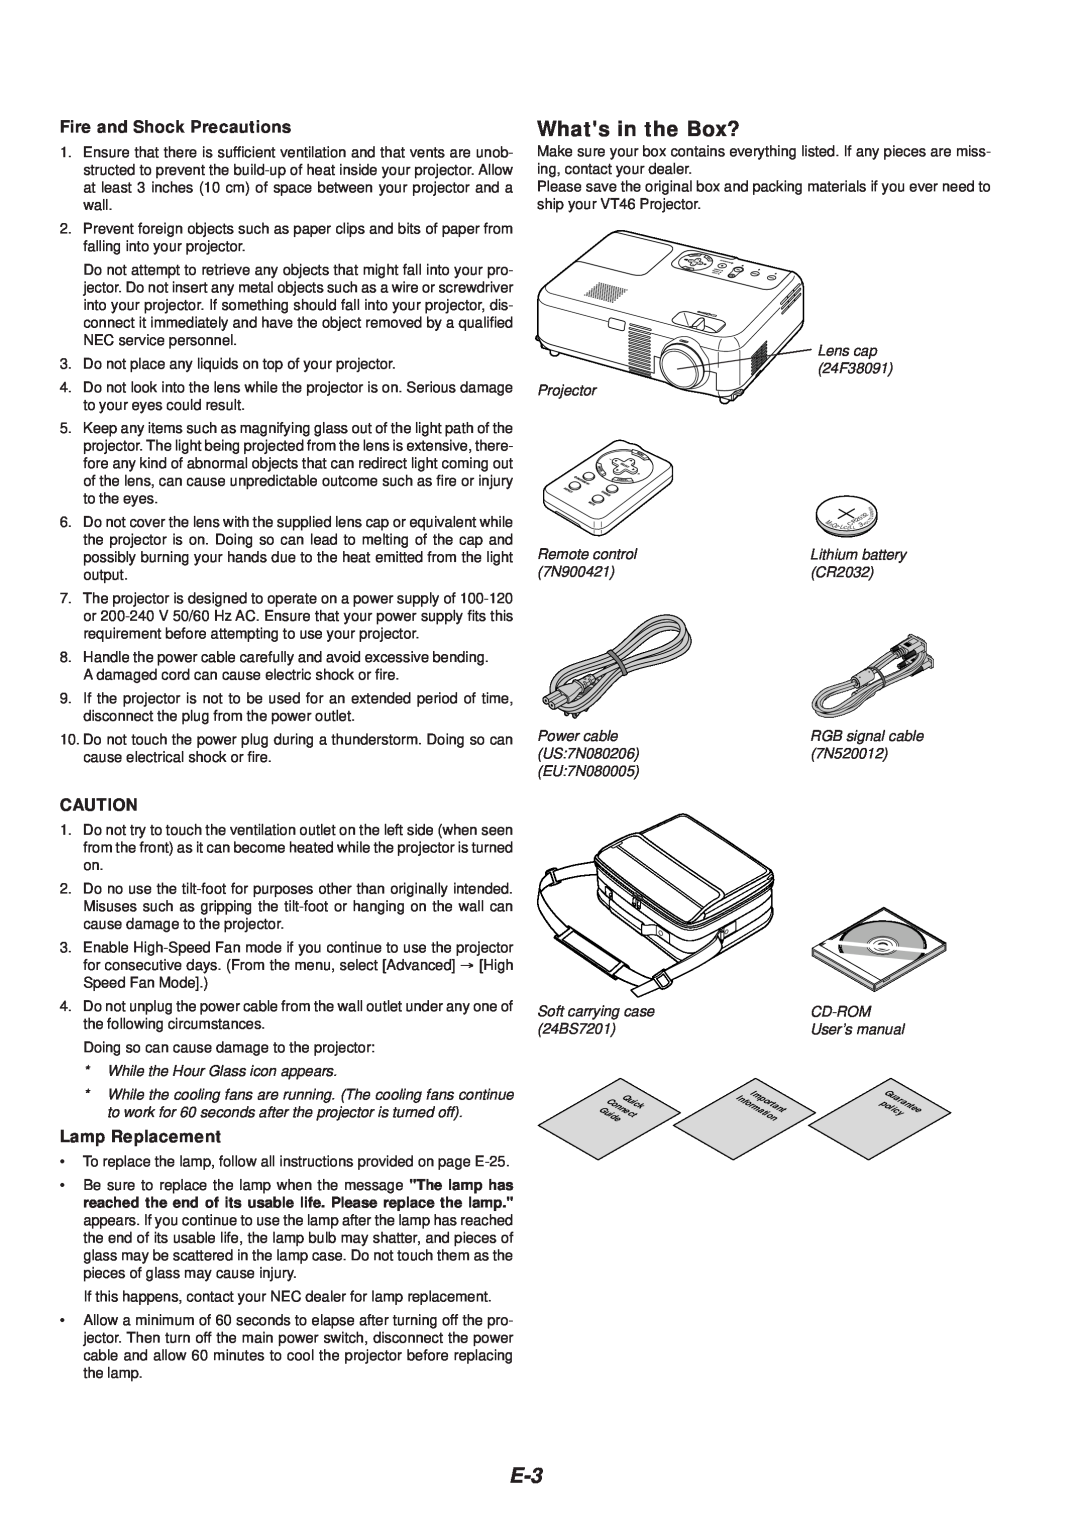 NEC VT46 user manual Whats in the Box?, Fire and Shock Precautions, Lamp Replacement 